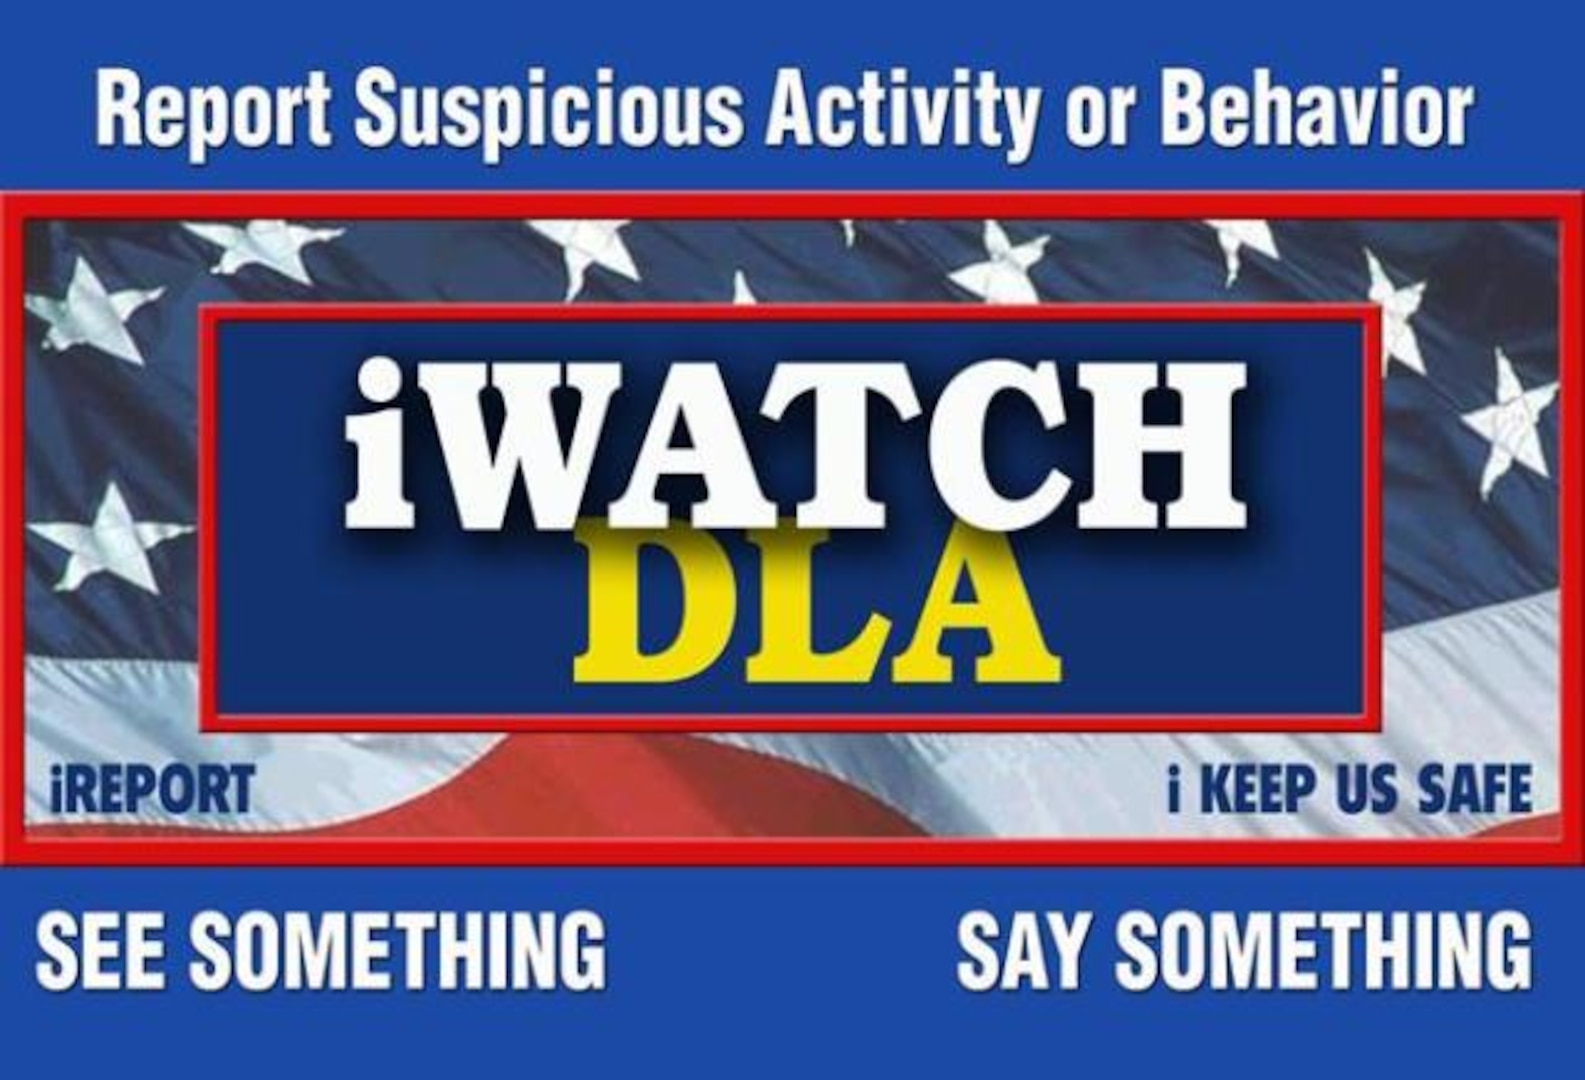 If you see suspicious behavior, report it to authorities immediately.